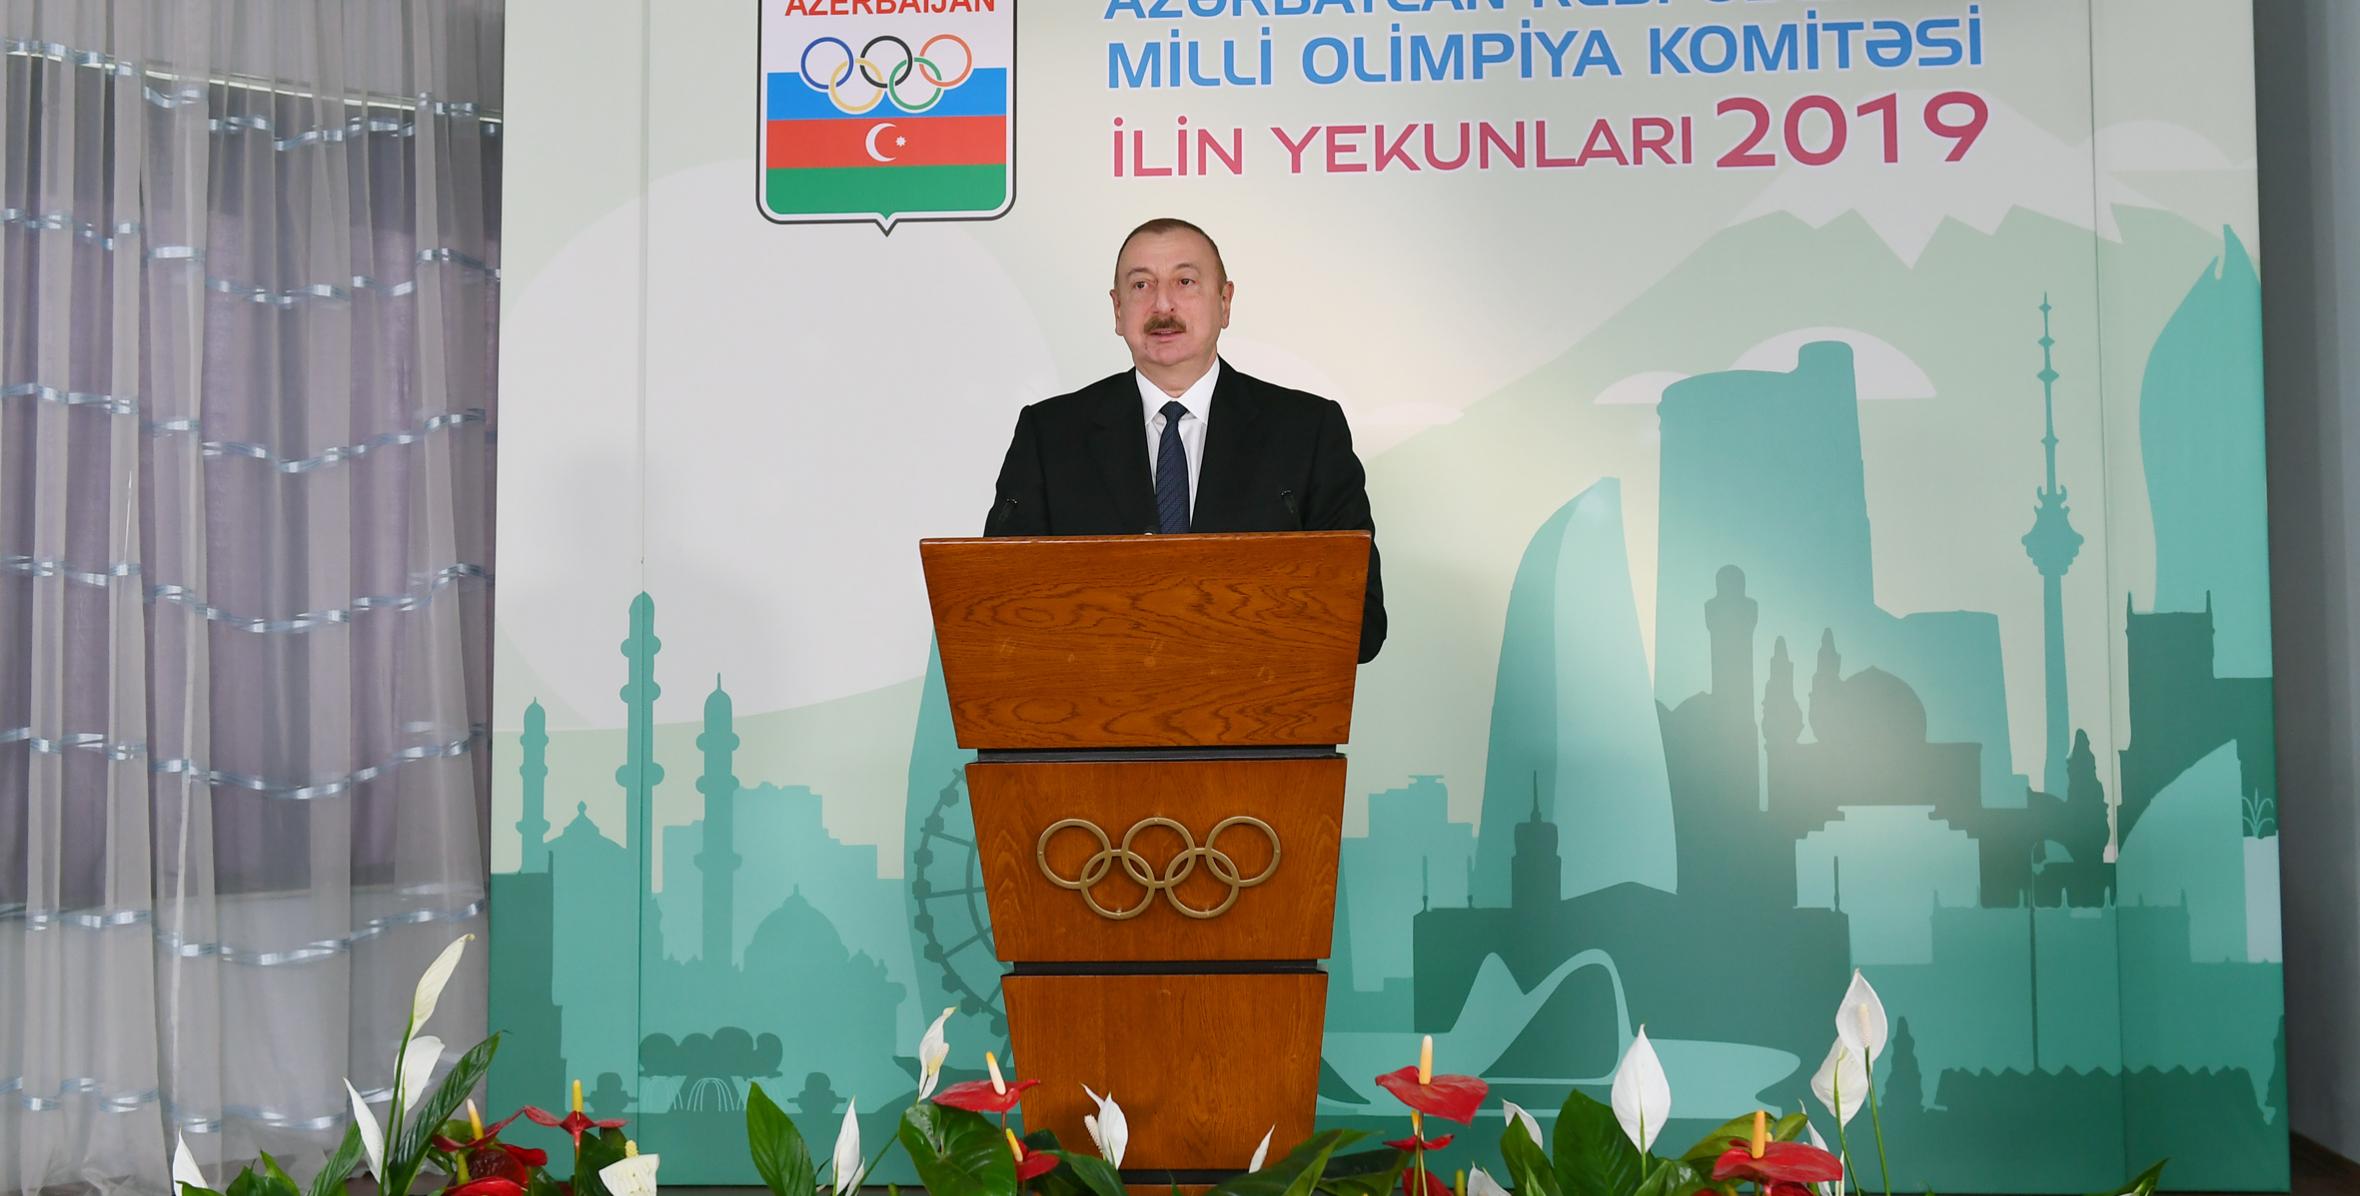 Ilham Aliyev attended ceremony dedicated to 2019 sporting results